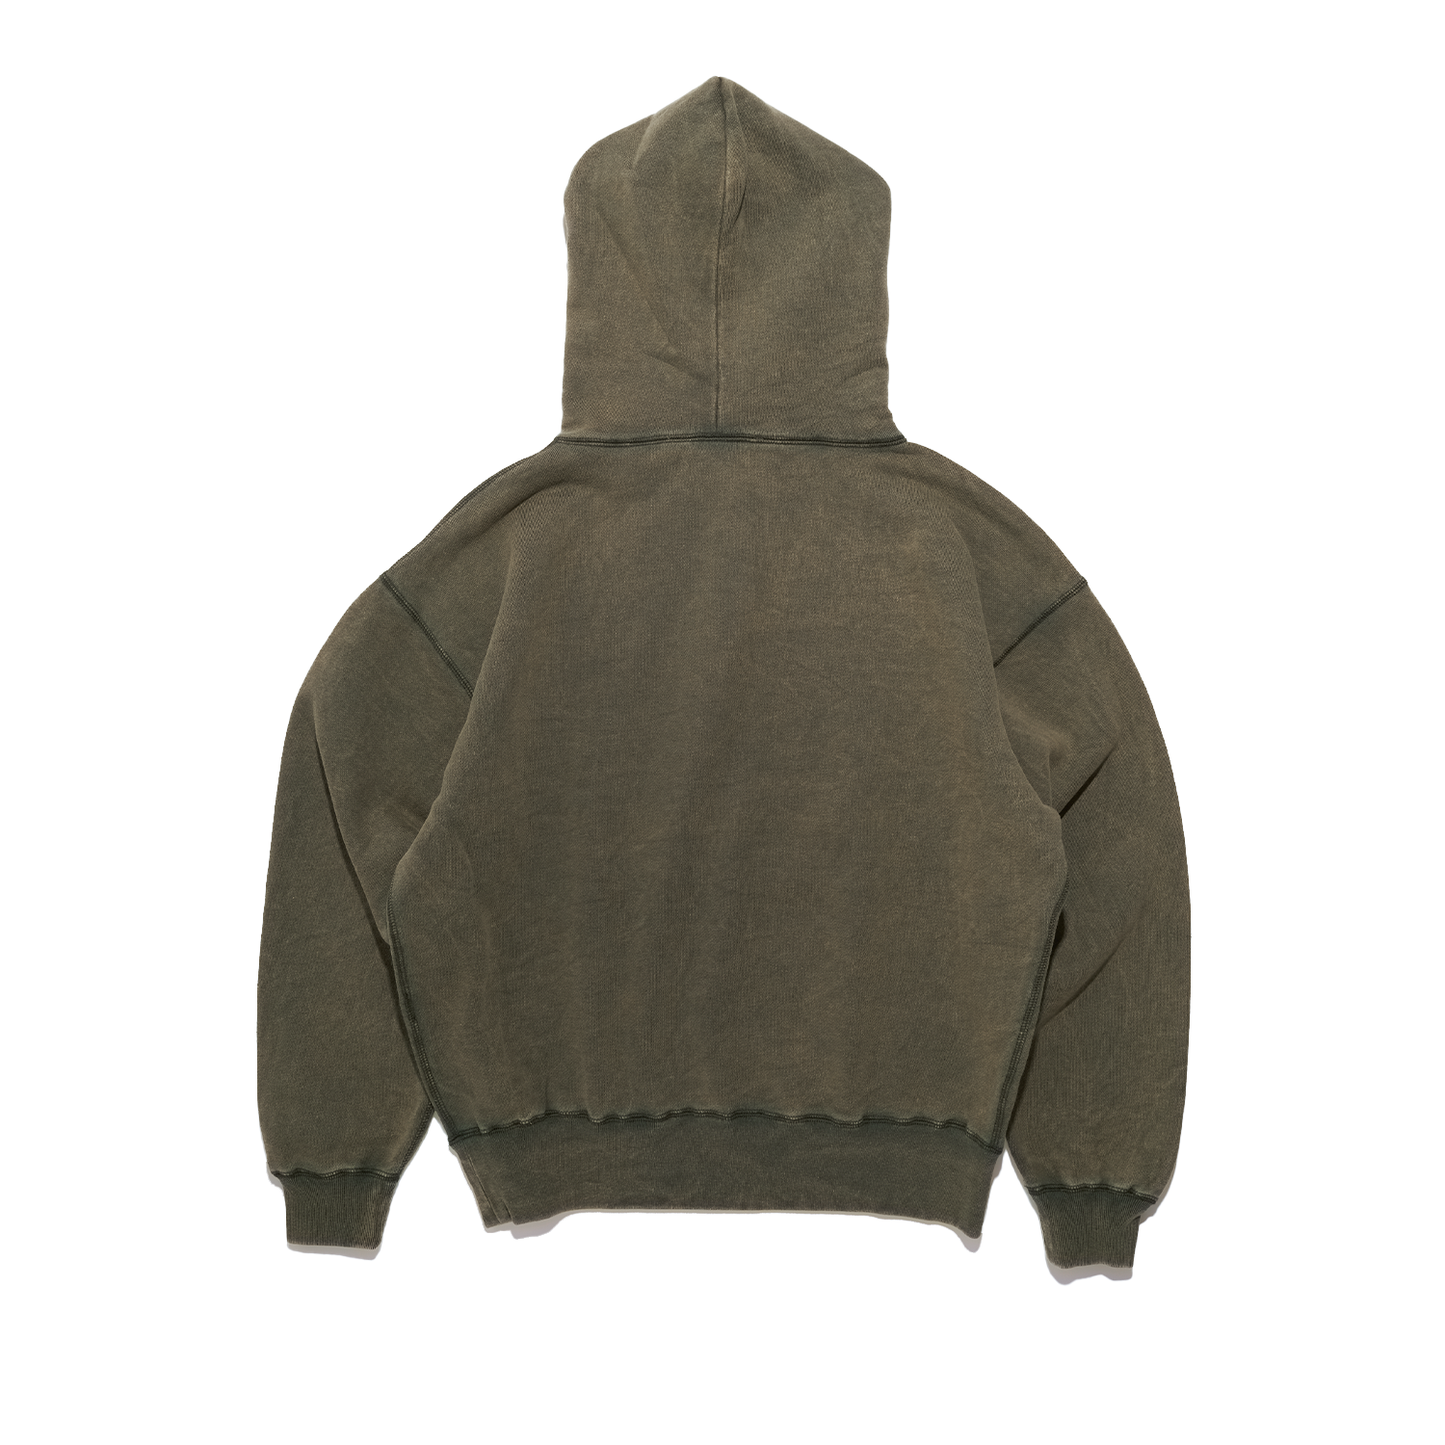 DOE WASHED COLLEGE LOGO EMBROIDERY HOODIE